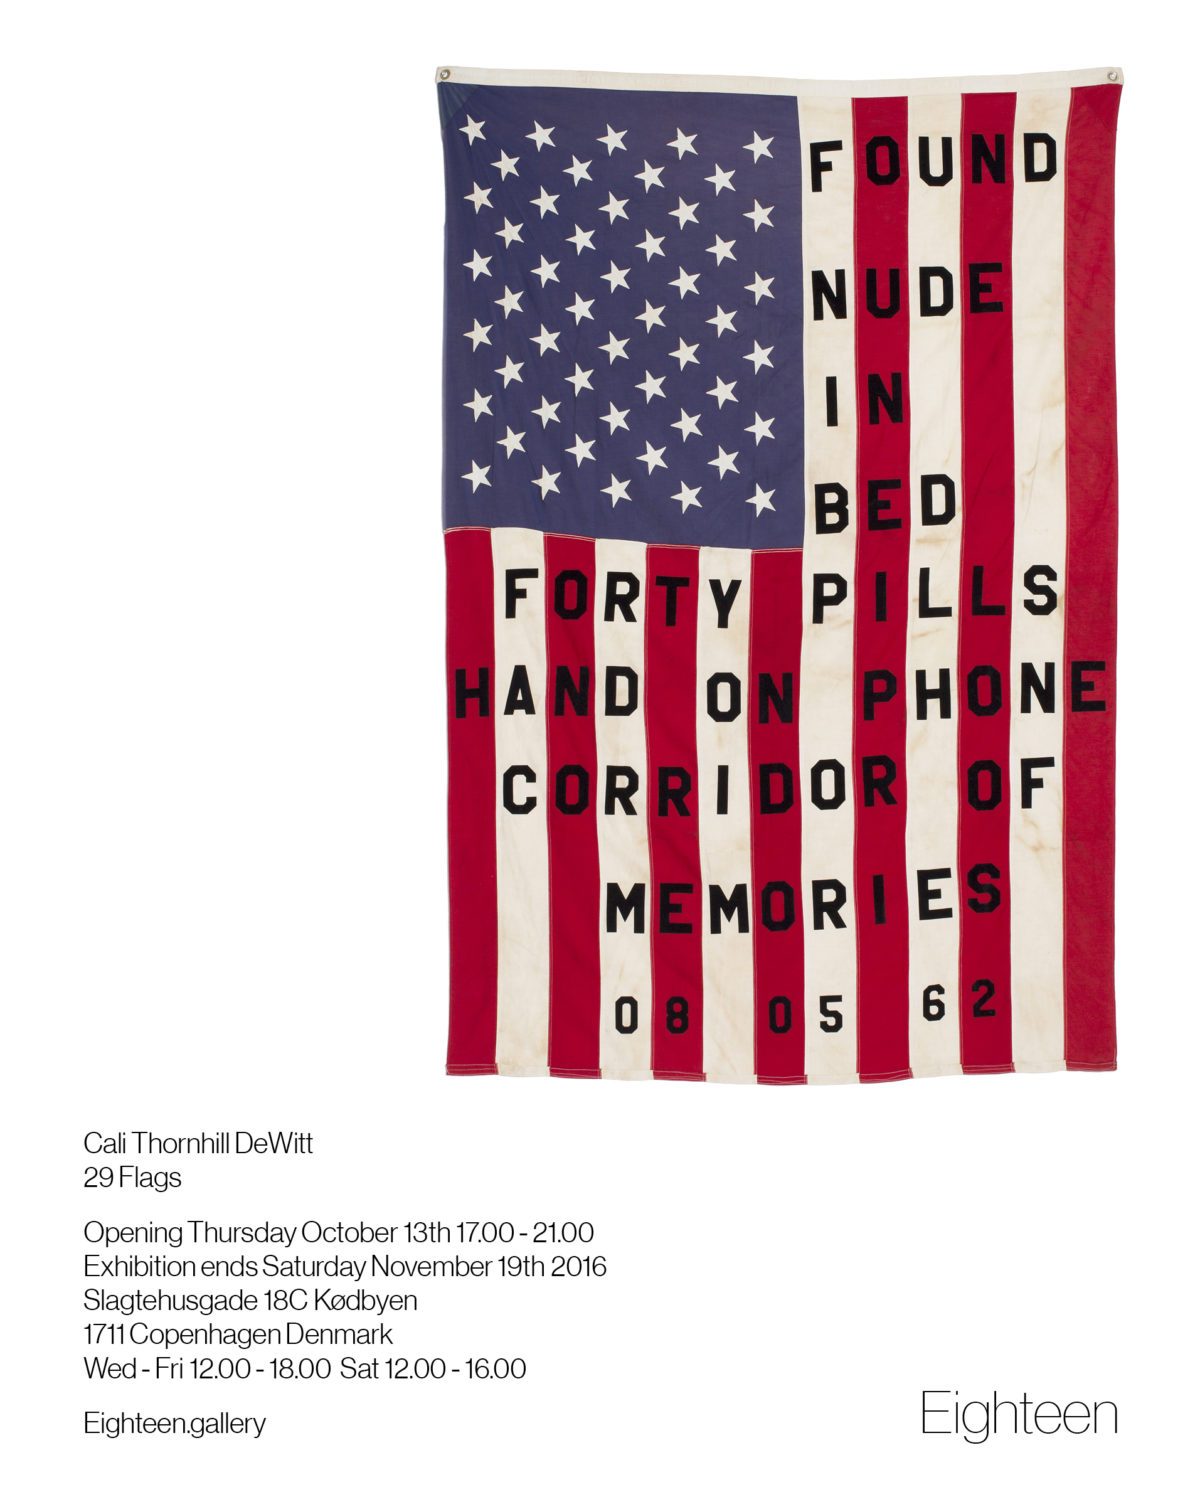 Opening reception: 29 Flags – a solo exhibition by Cali Thornhill DeWitt